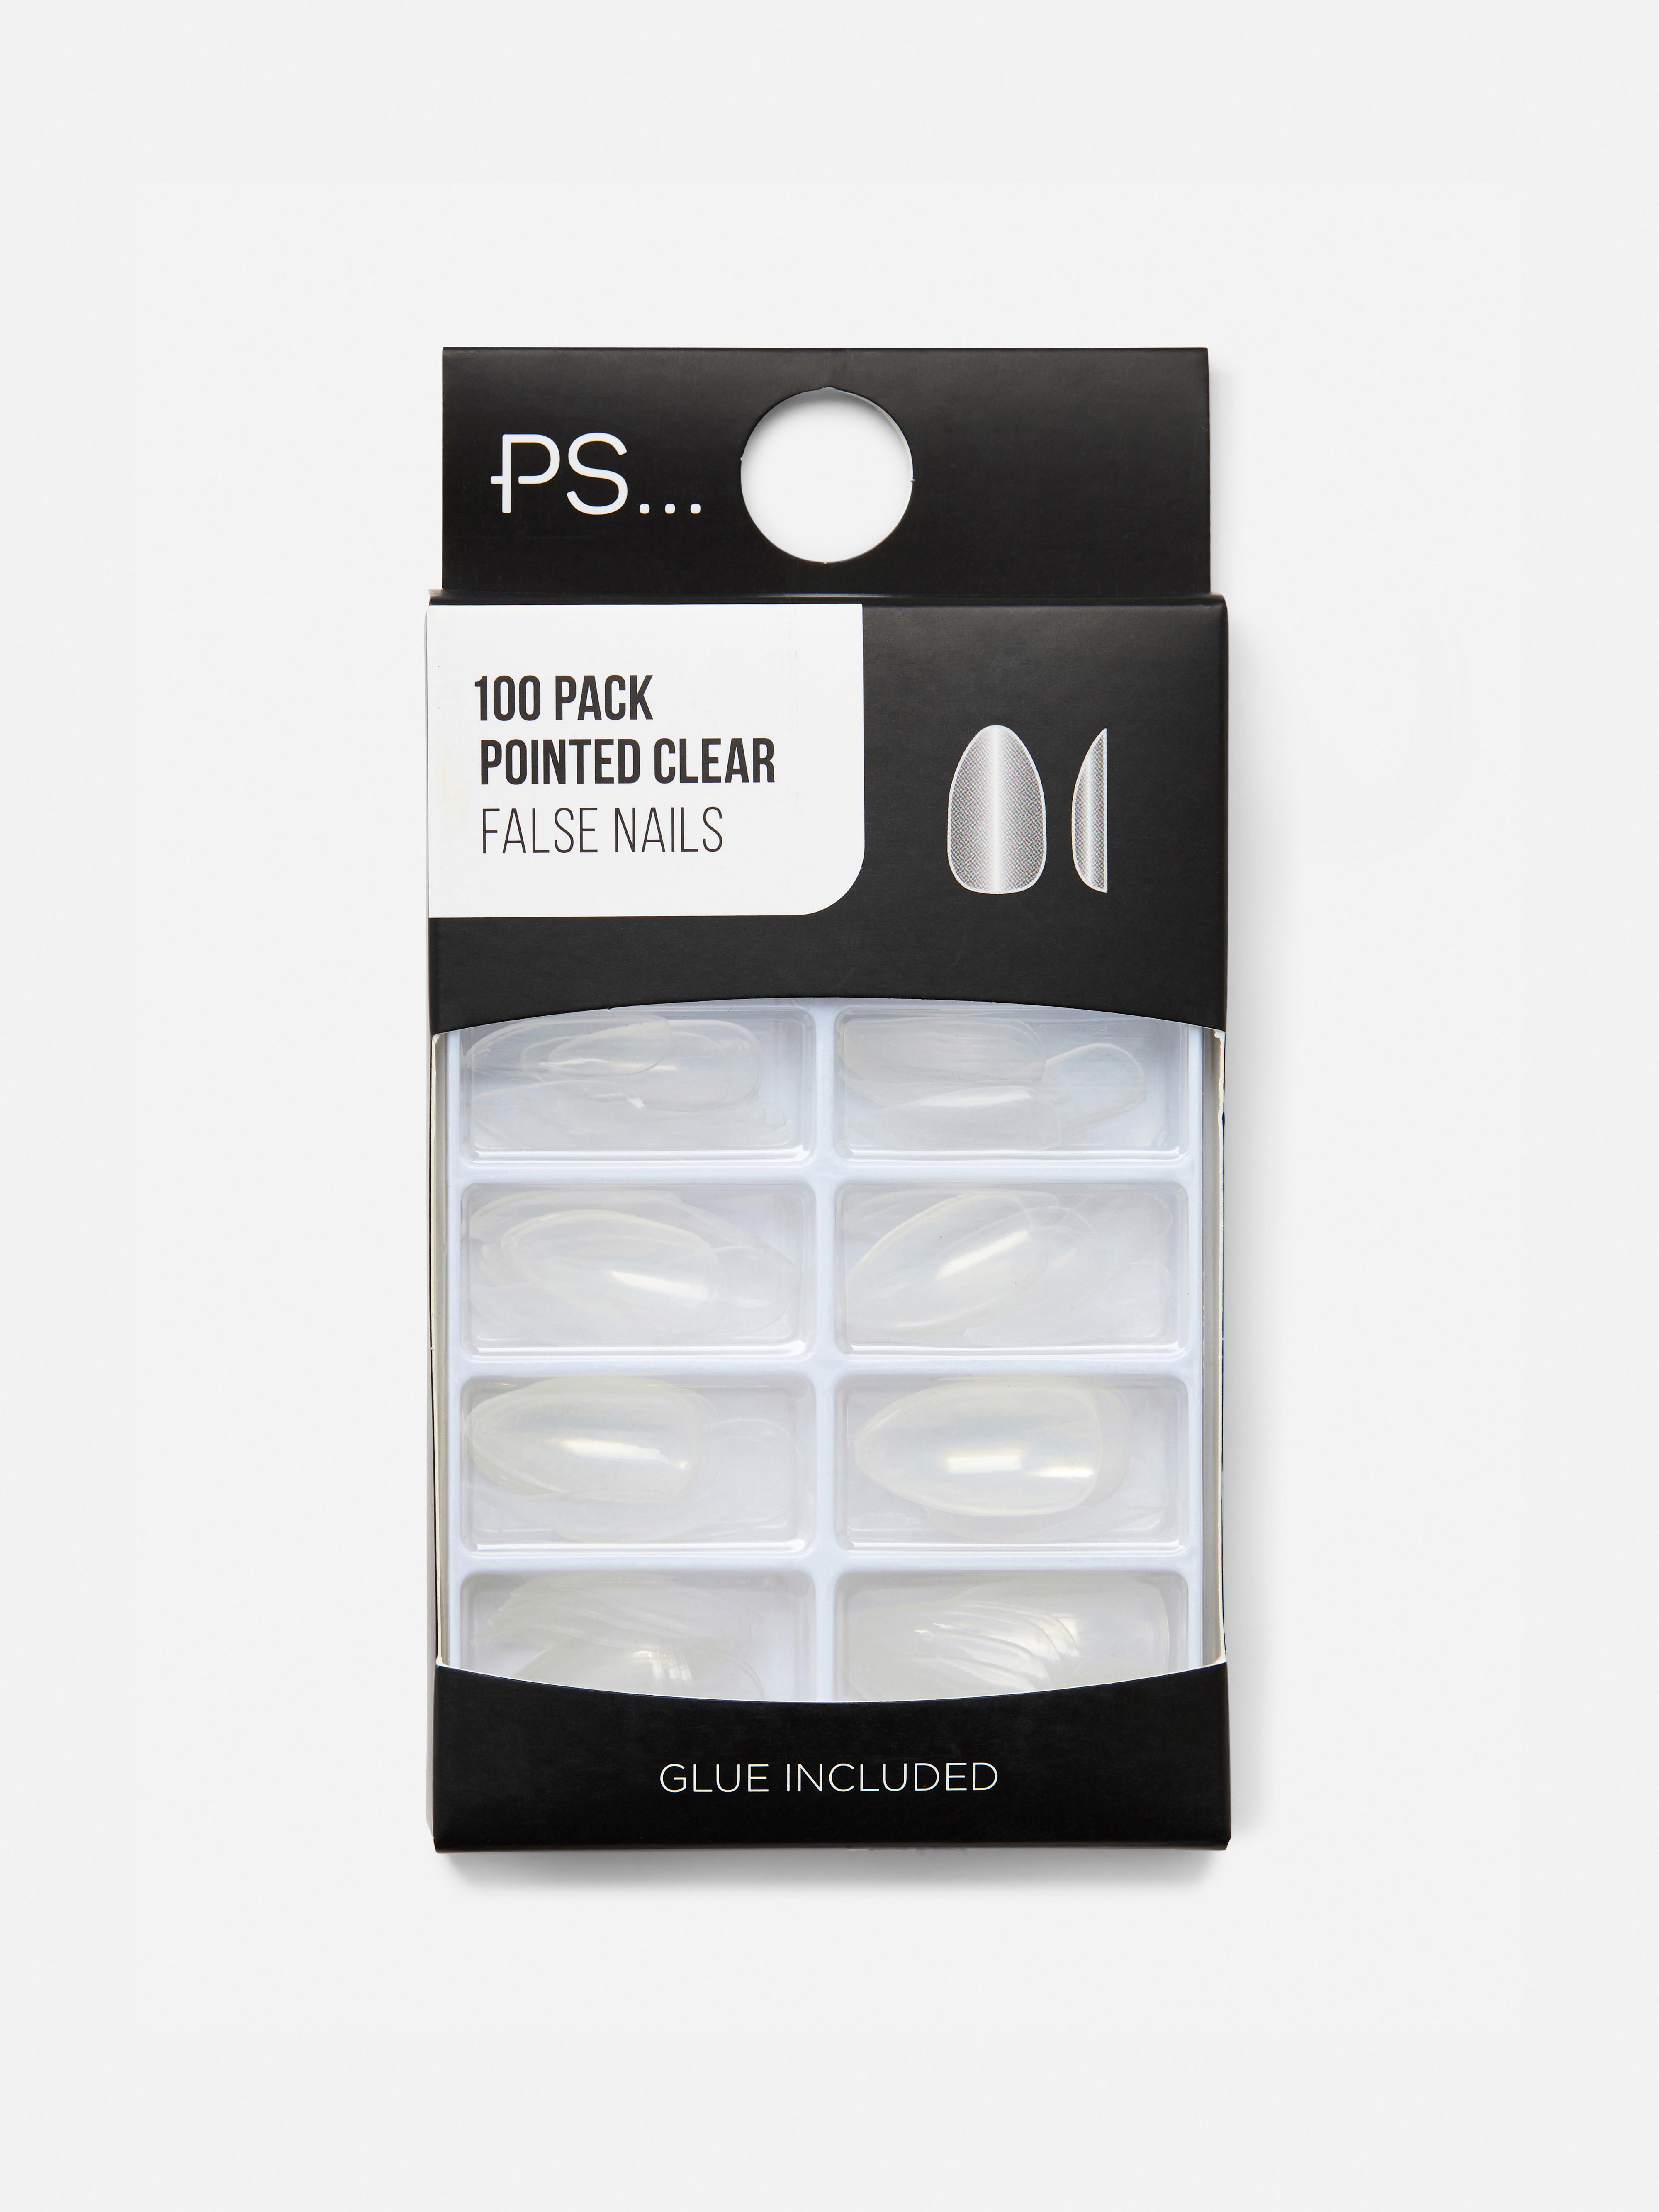 100pk PS... Clear Pointed False Nails